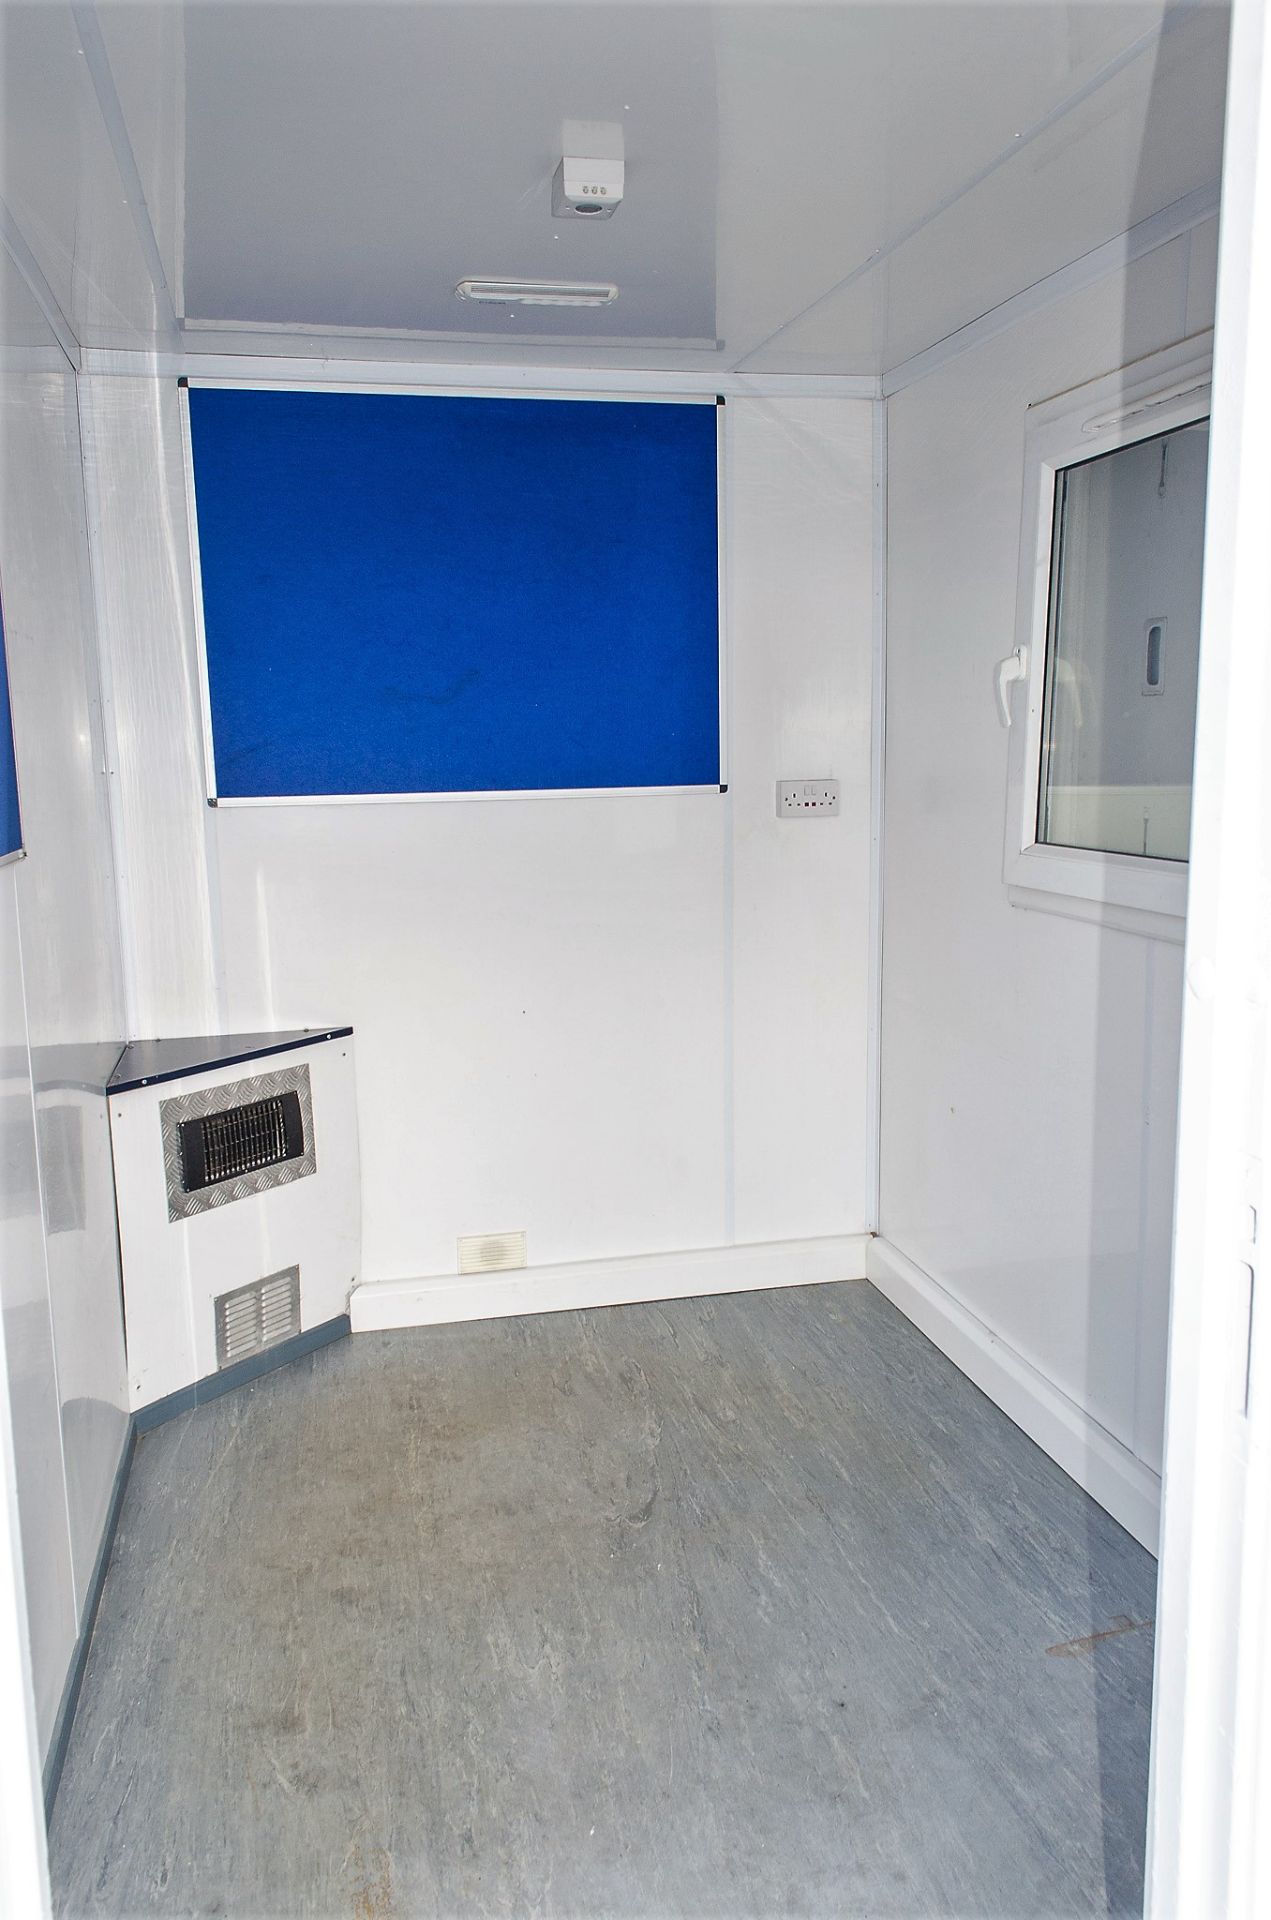 25 ft x 9 ft steel anti-vandal welfare site unit Comprising of: Office, canteen, drying room, toilet - Image 5 of 11